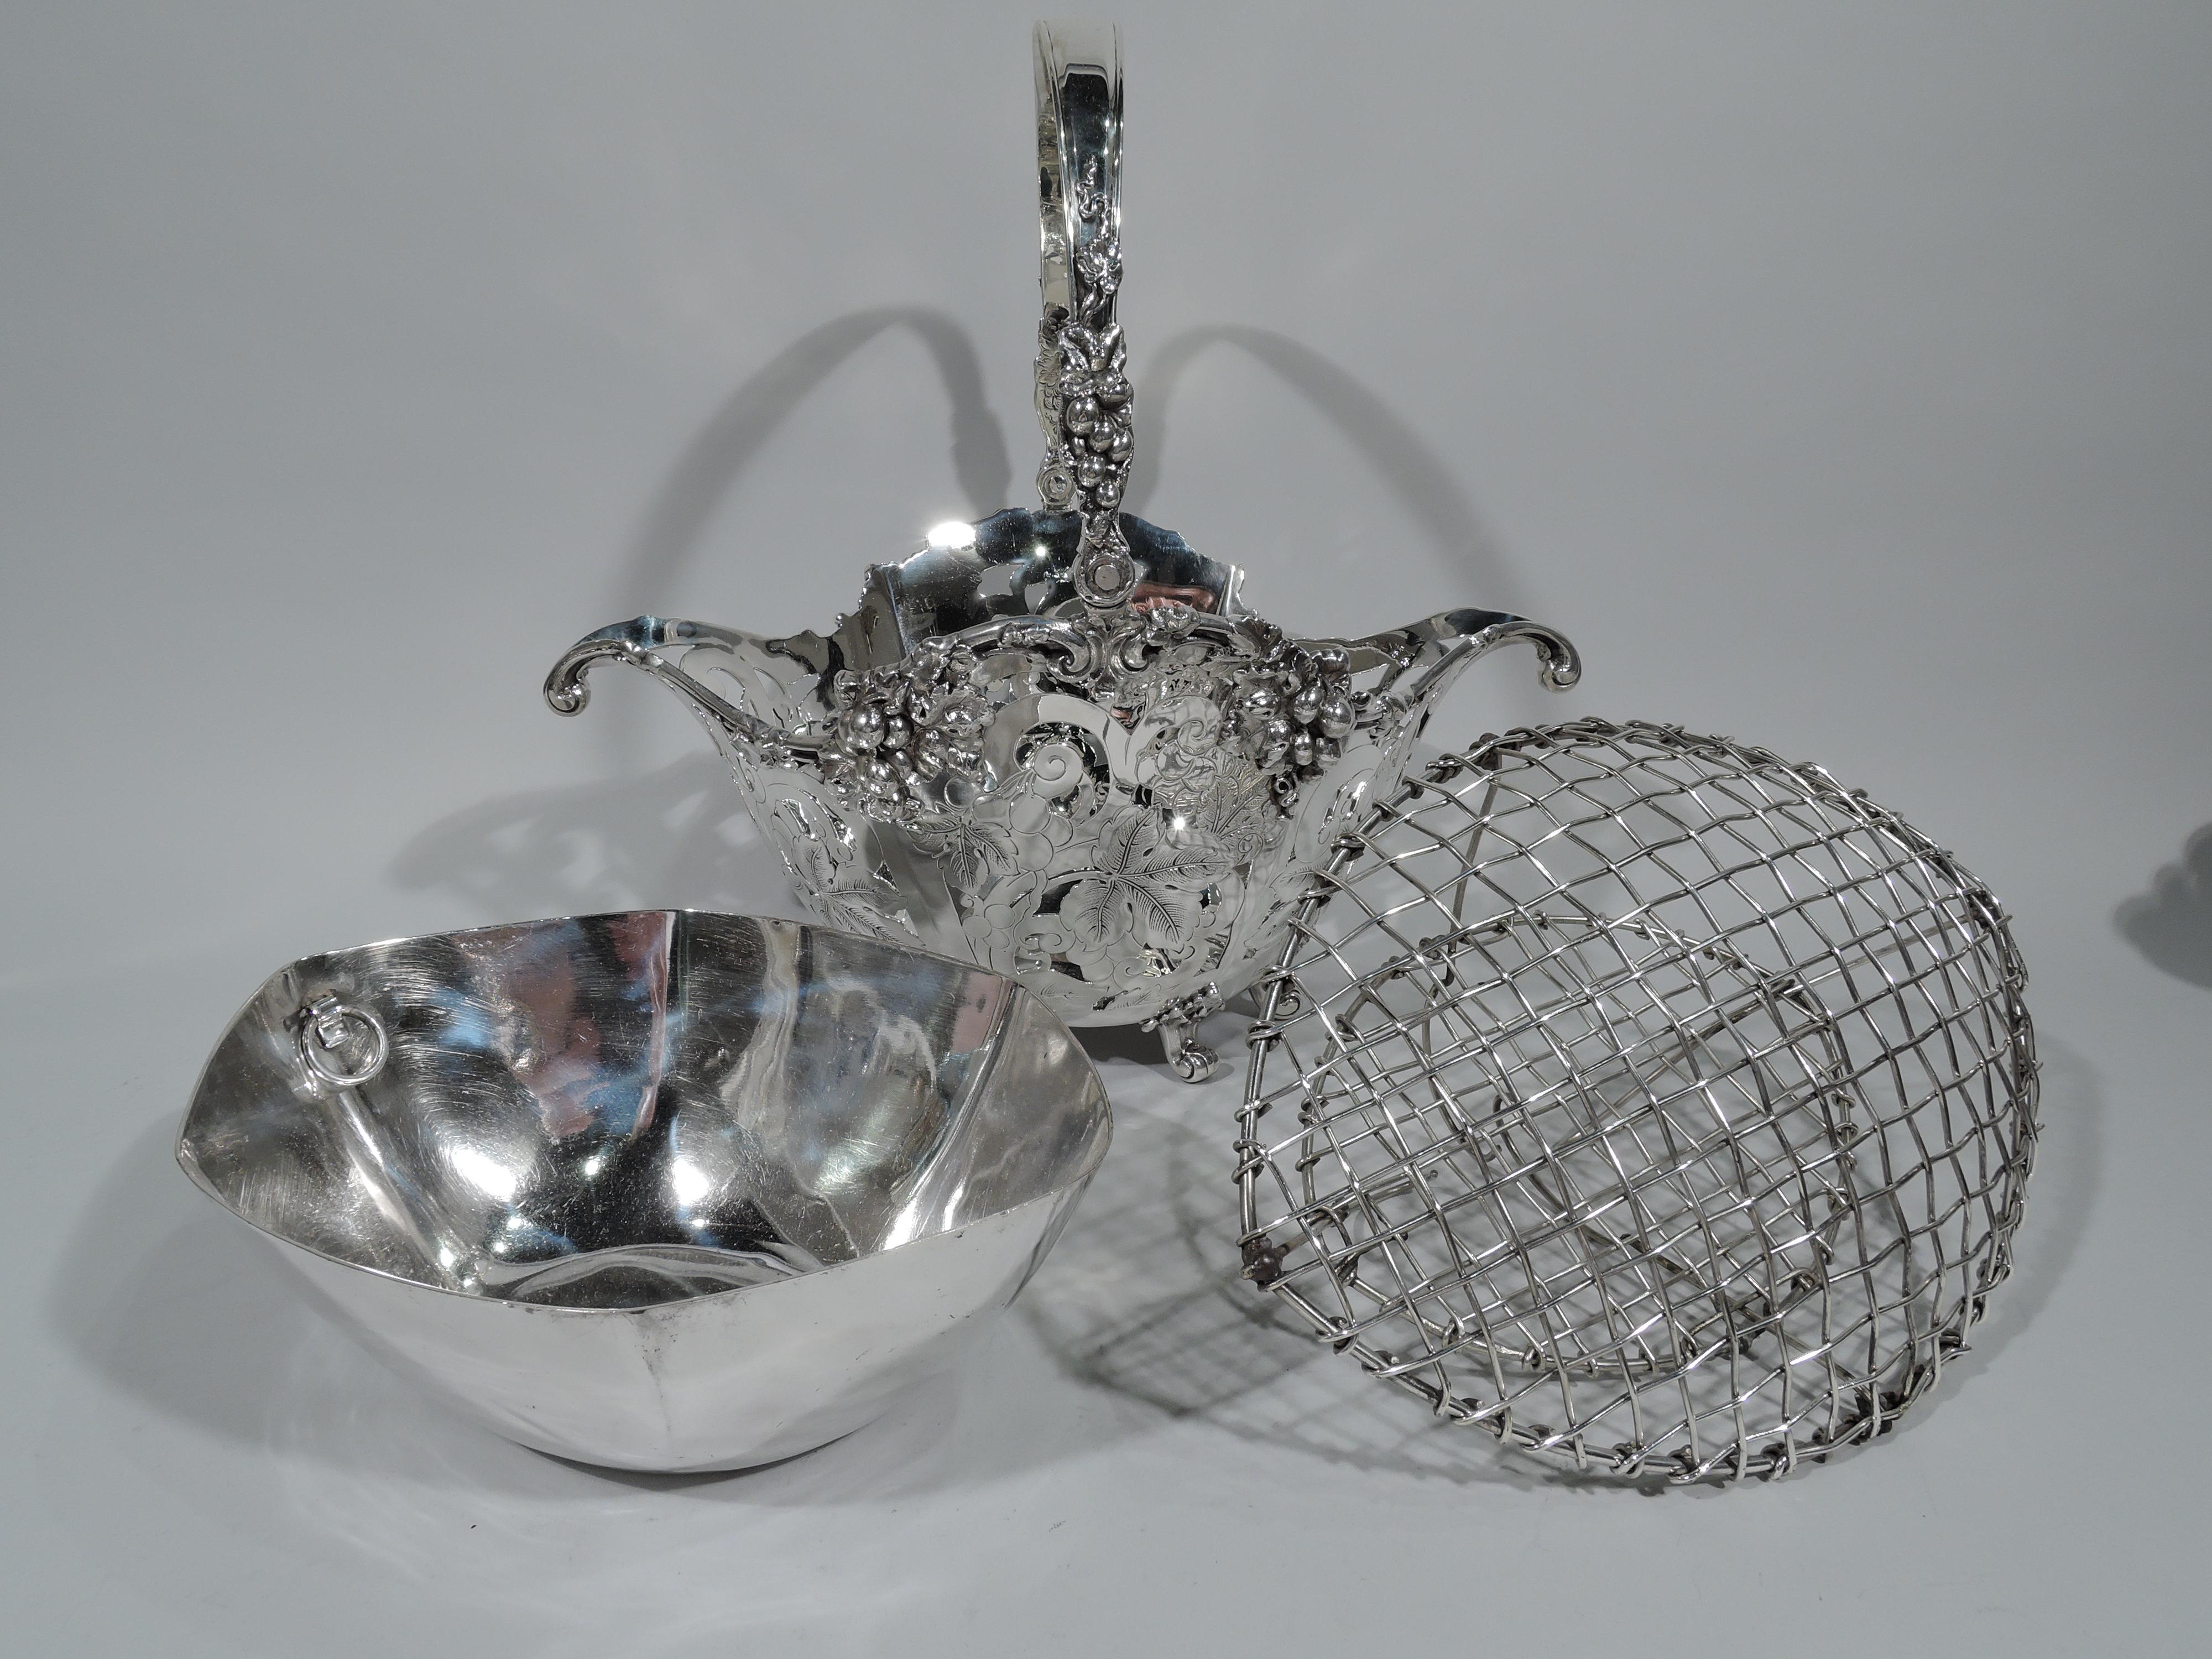 Edwardian sterling silver basket. Made by Tiffany & Co. in New York, circa 1904. Ovoid with tapering sides, scrolled rim, and scrolled rim. Six leaf-mounted scroll supports and c-scroll swing handle. Pierced scrolls, engraved leaves, and applied